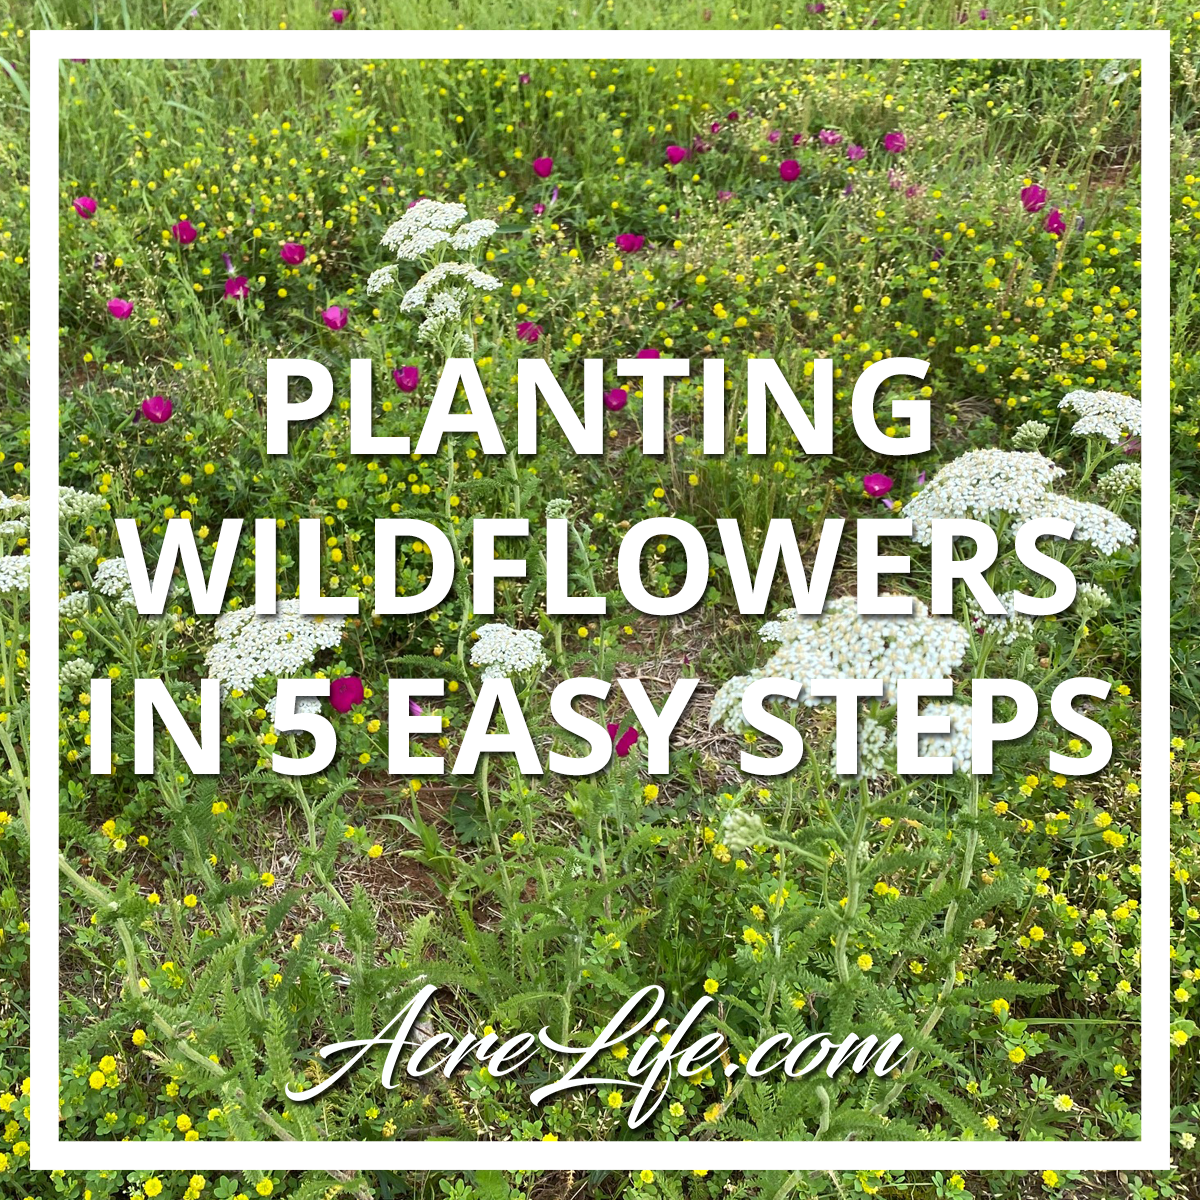 Planting Wildflowers in 5 Easy Steps - Acre Life